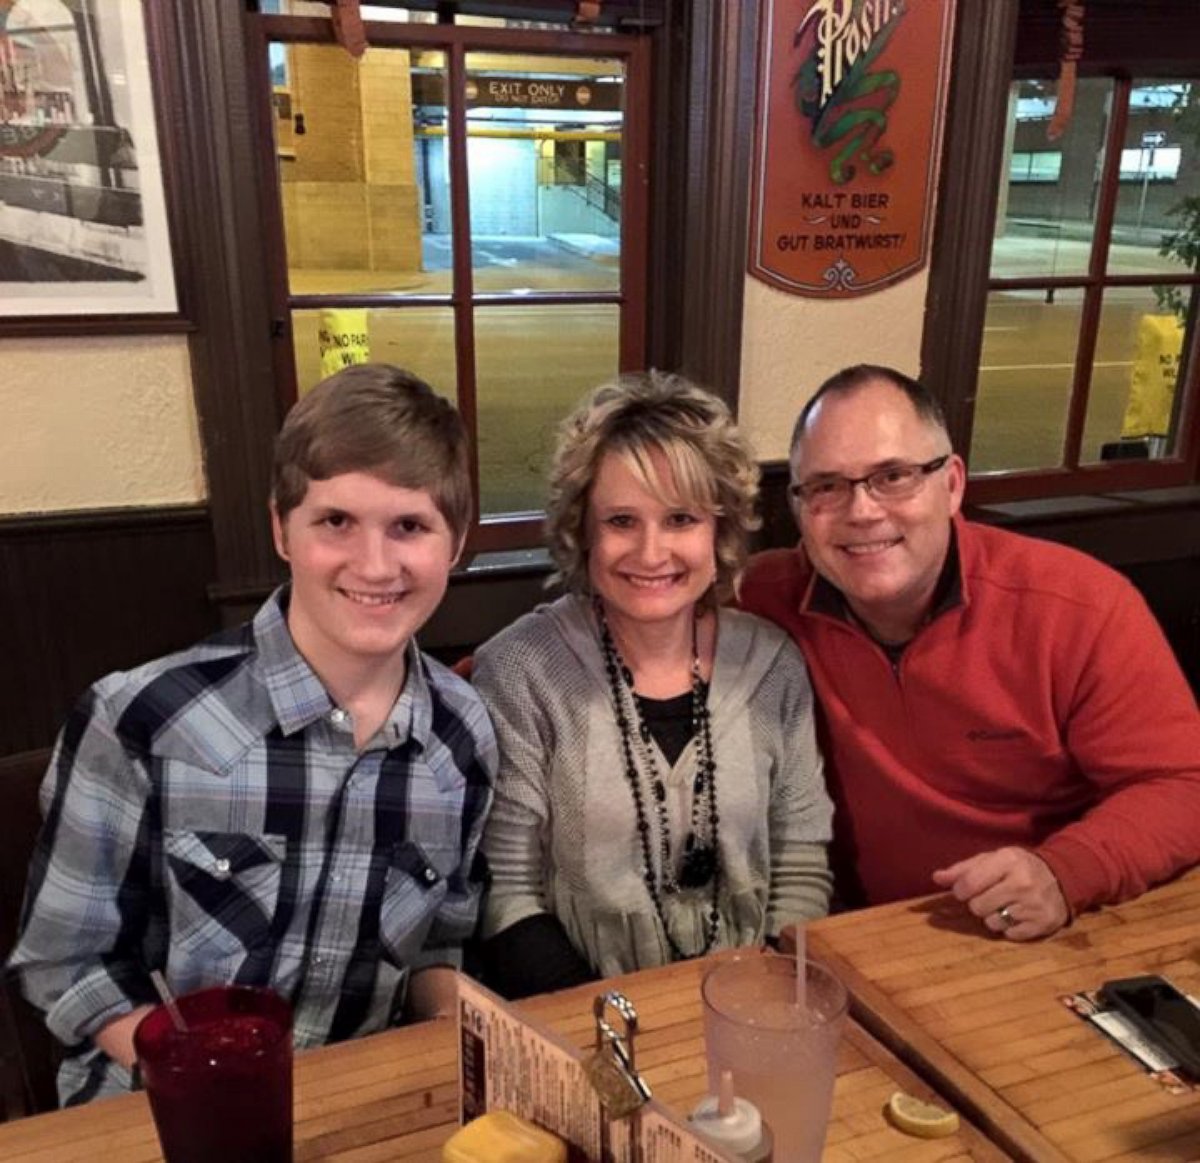 PHOTO: (L-R) Blake Hyland is seen with his mother, Cyndi Hyland and father, Pat Hyland in a recent photo.